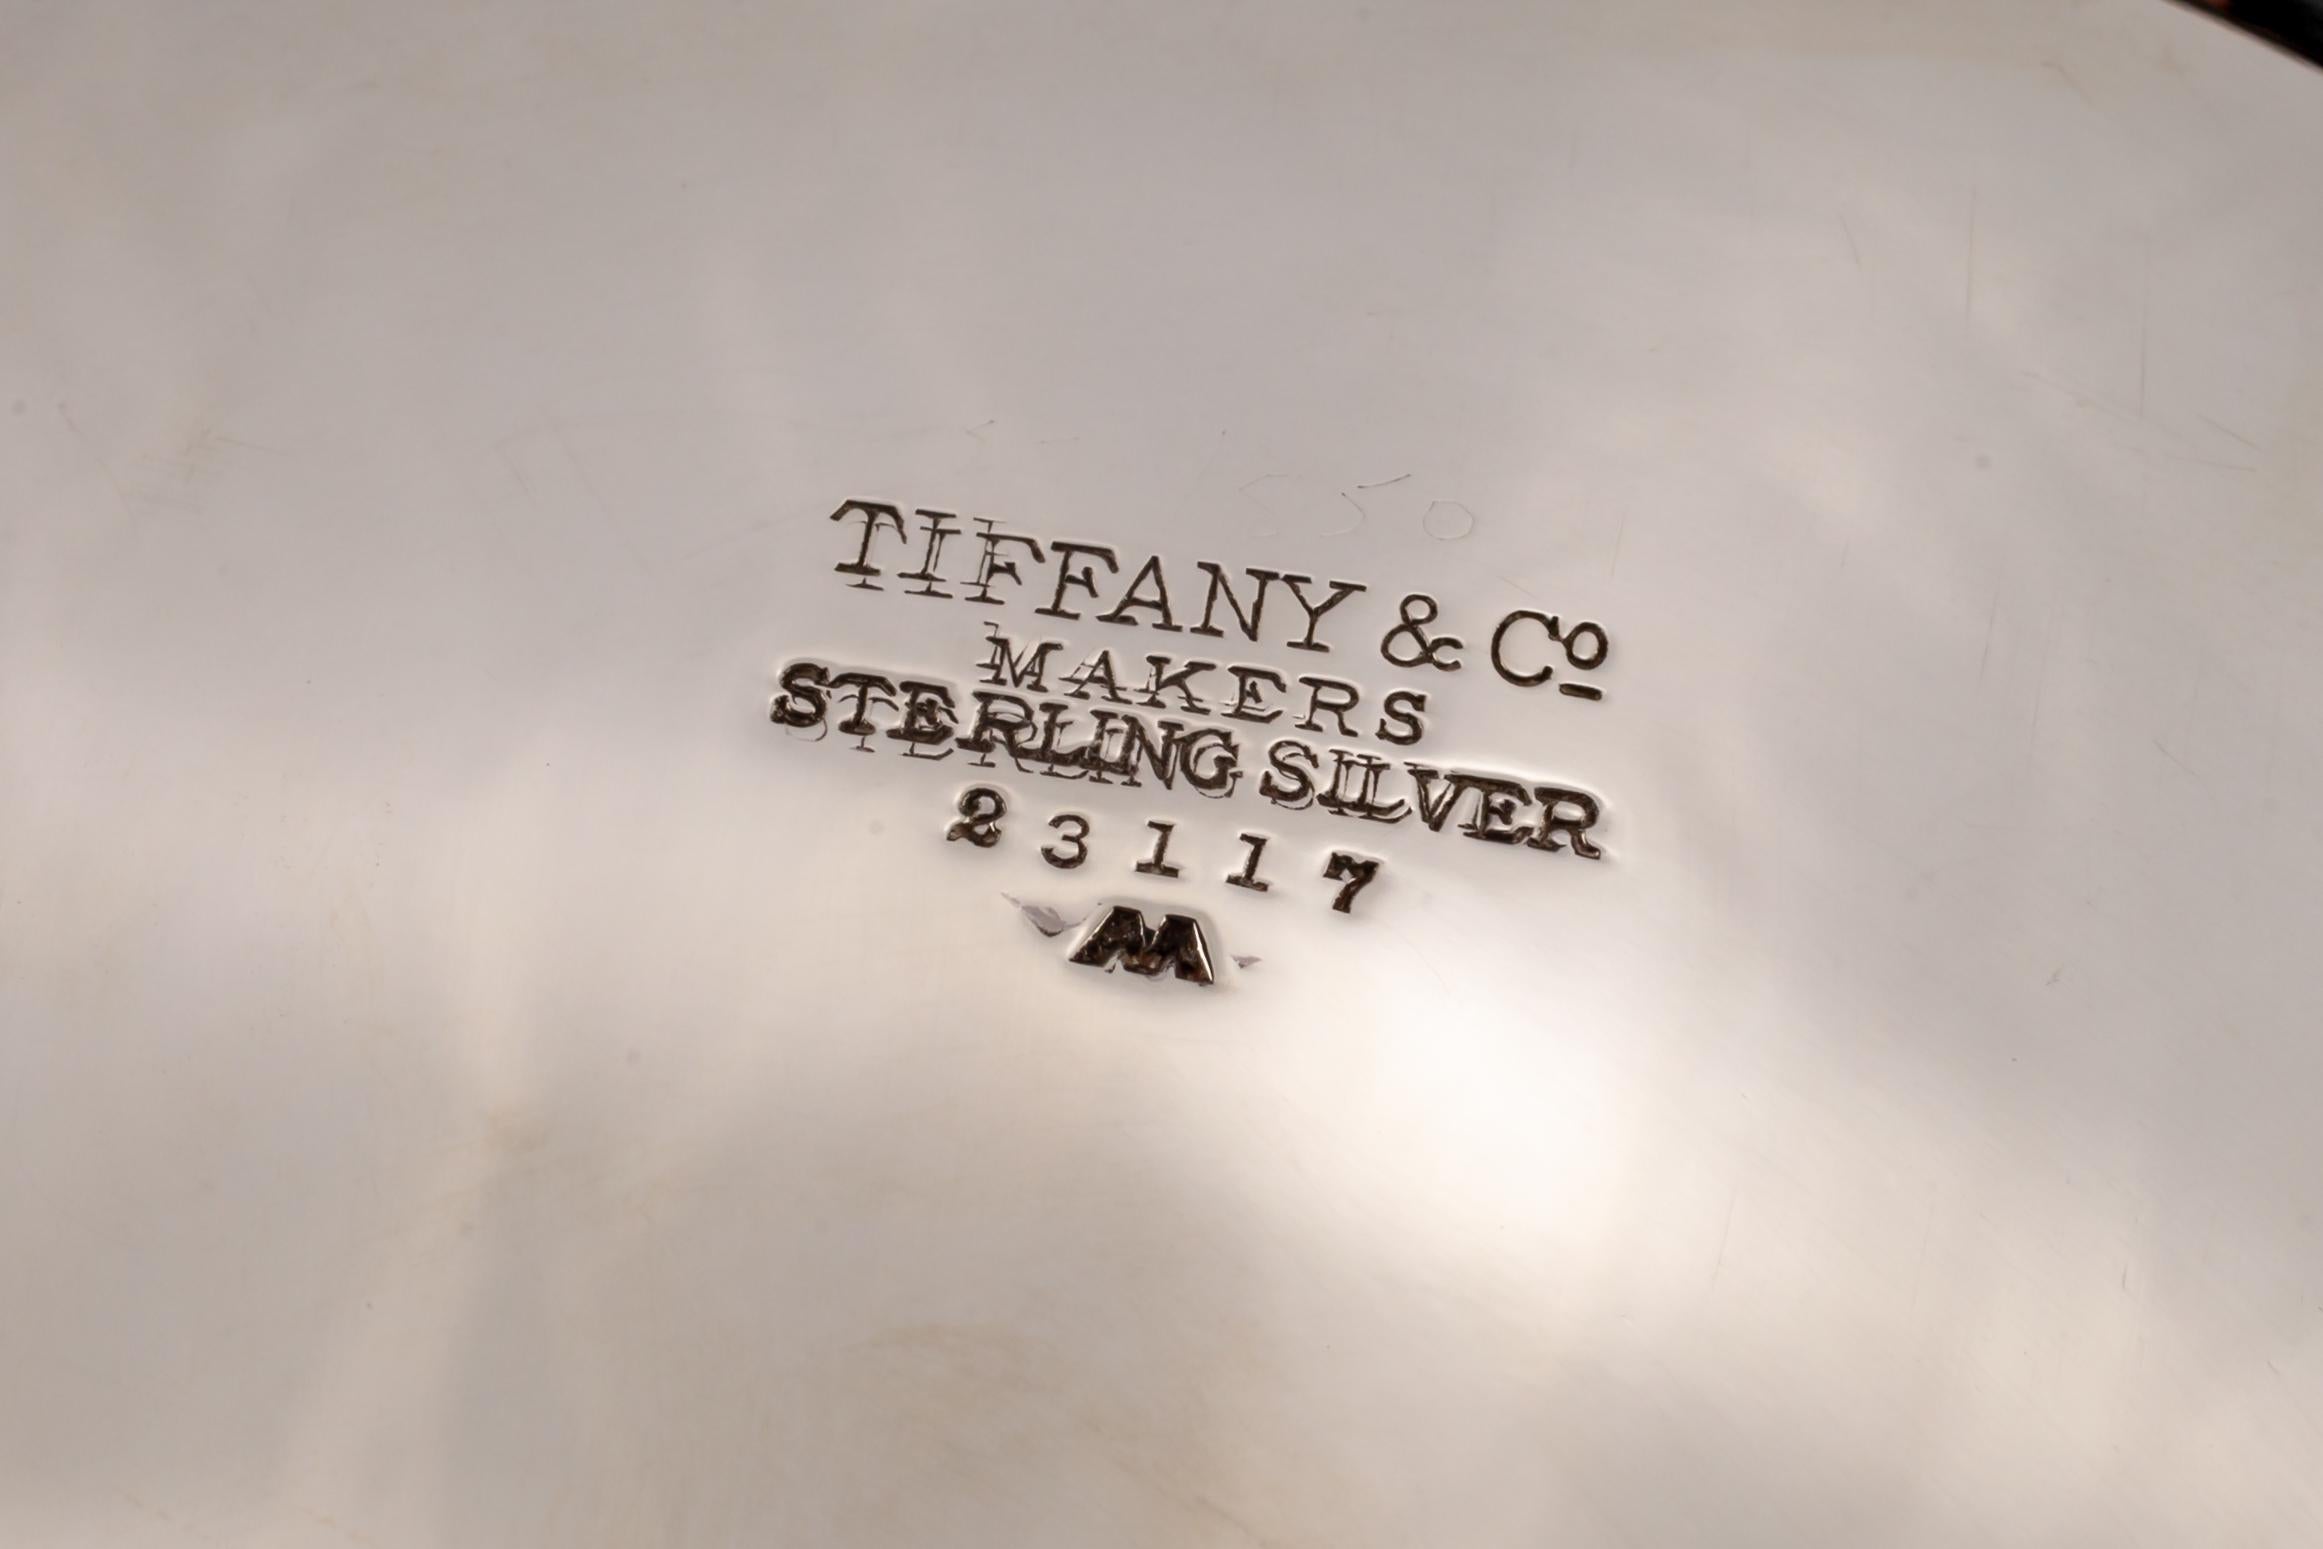 Tiffany & Co. Makers Sterling Silver Windham 8